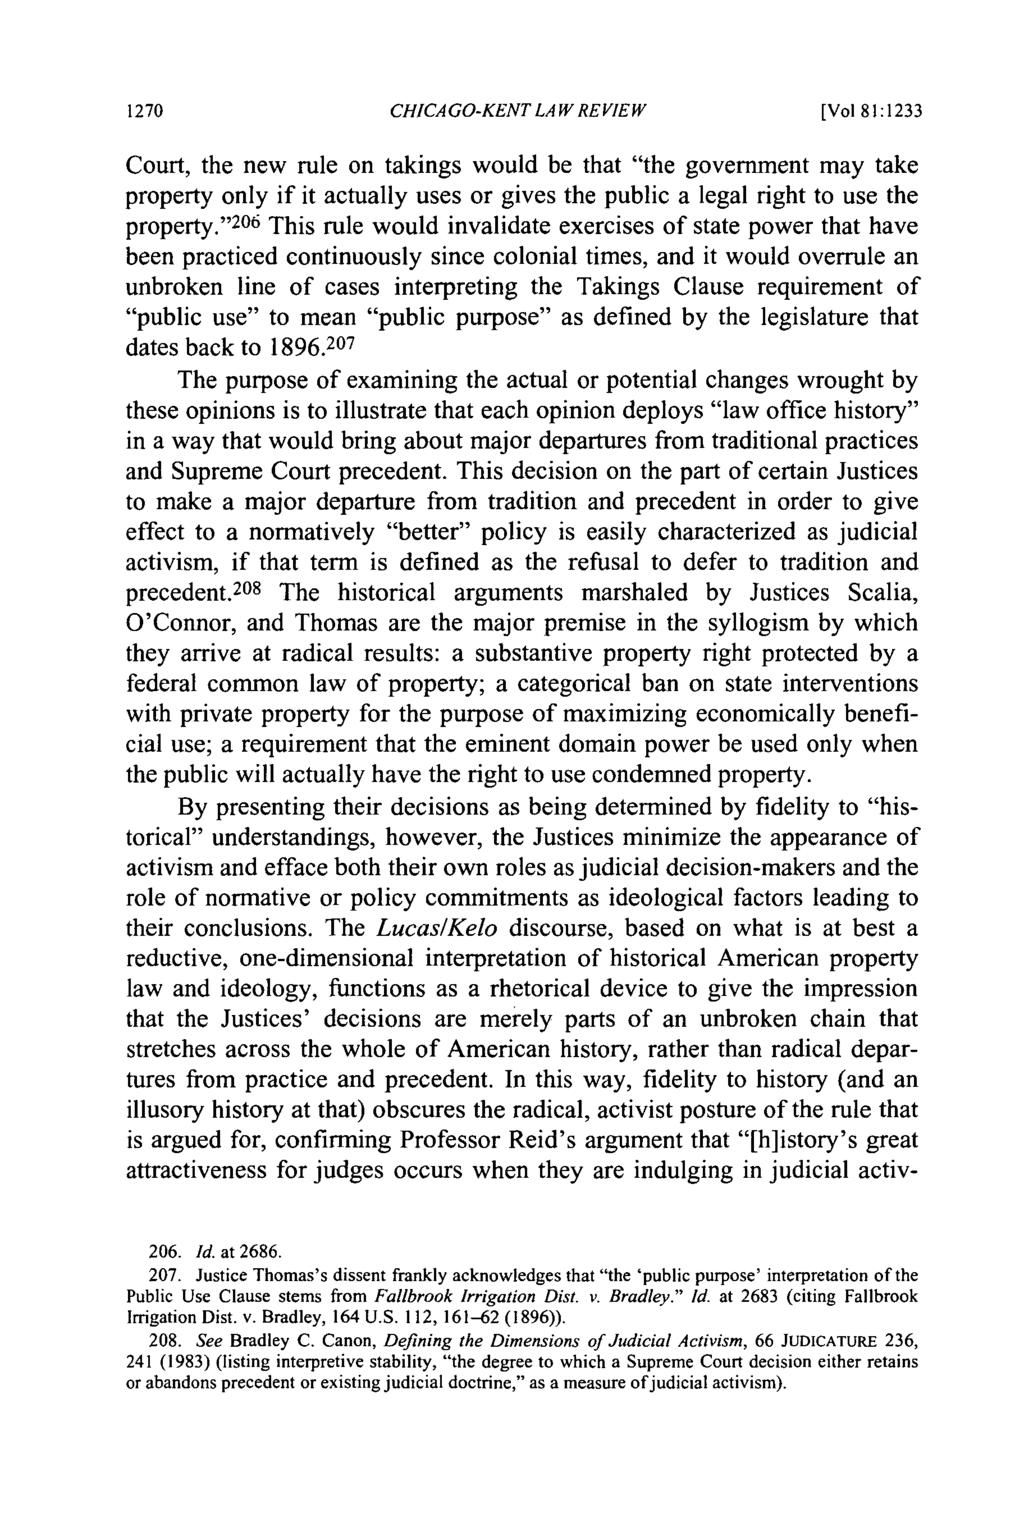 CHICAGO-KENT LAW REVIEW [Vol 81:1233 Court, the new rule on takings would be that "the government may take property only if it actually uses or gives the public a legal right to use the property.